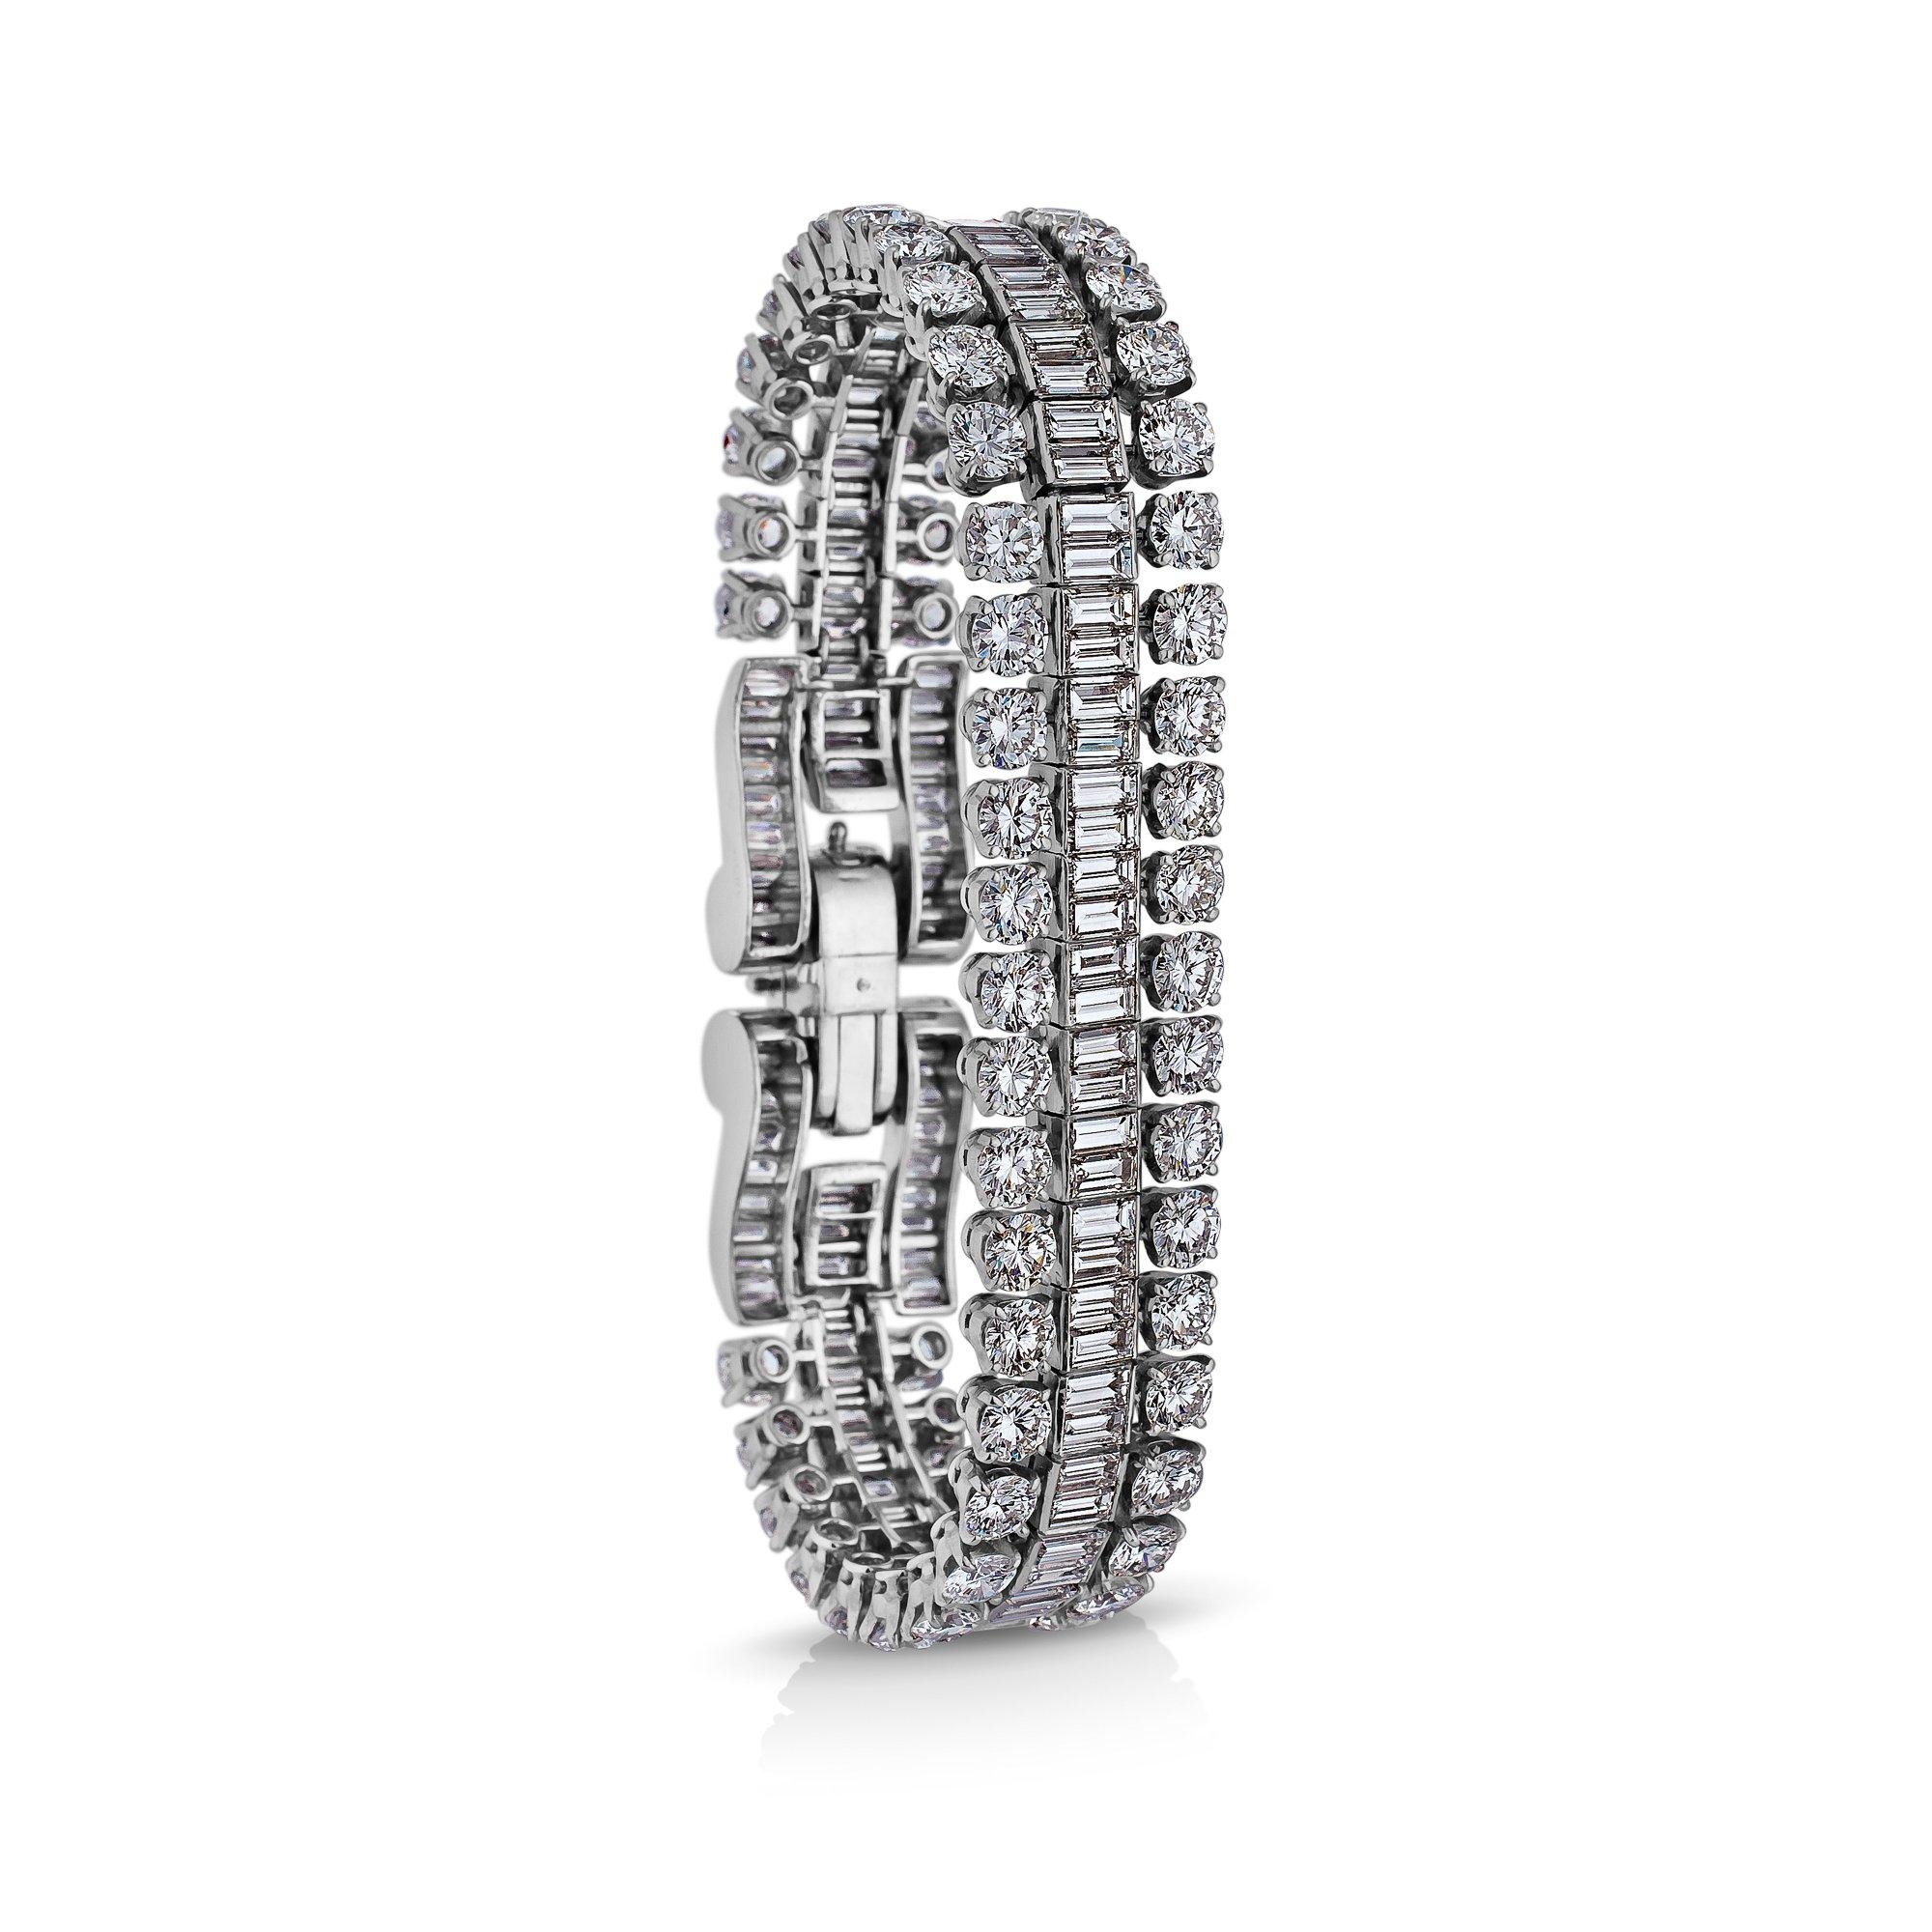 Sensuously supple and sparkling like ice, this mid-century Boucheron Paris bracelet is enchantingly irresistible.  With approximately 38 carats of round and baguette cut diamonds, this extraordinary jewel only appears once in a lifetime.  Circa